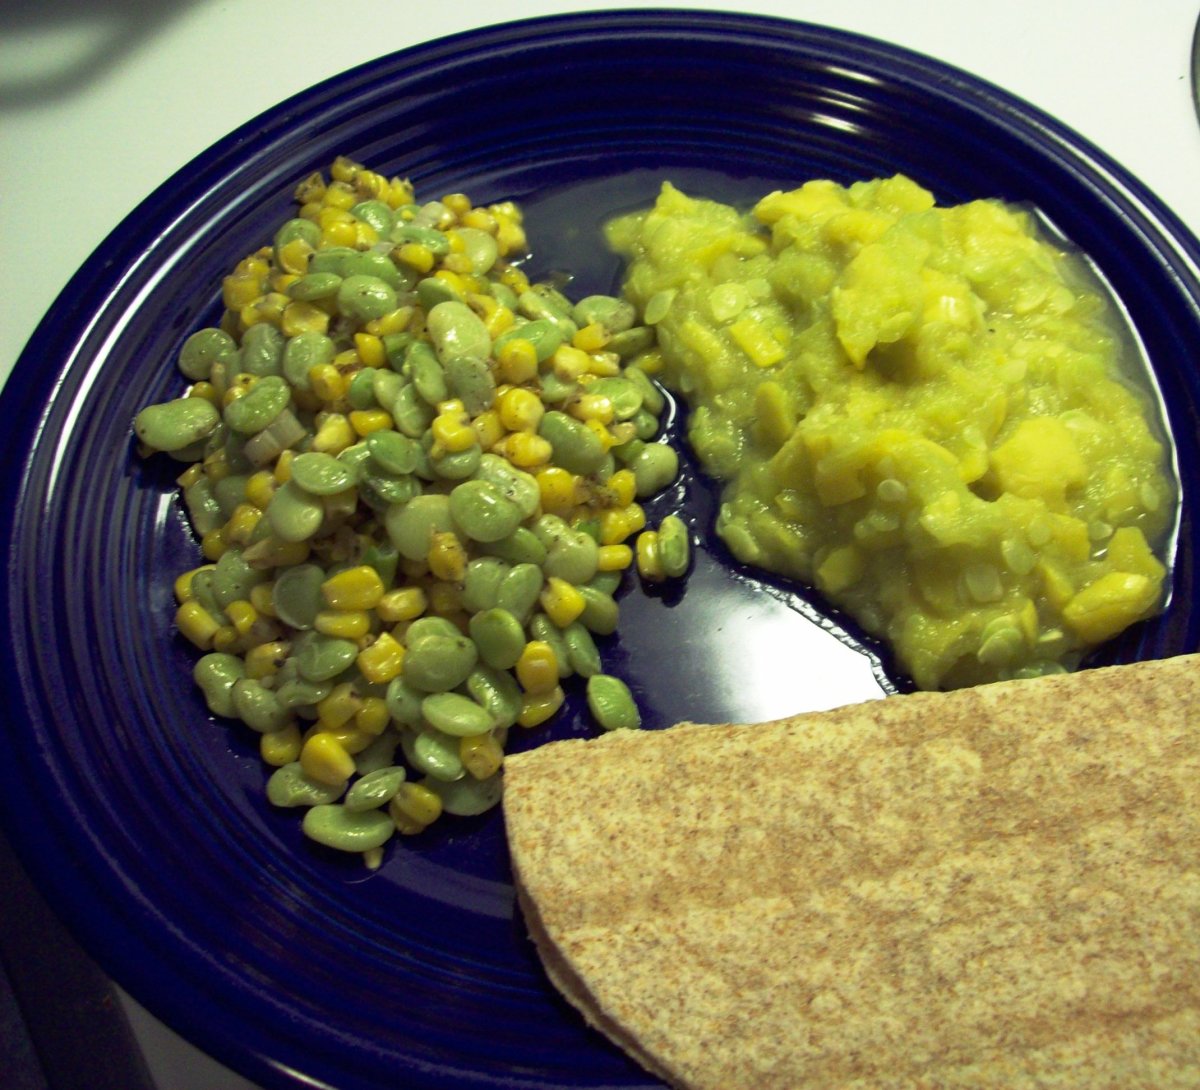 Succotash, mashed squash and a tortilla.  Though it's not the most colorful meal in the world, it is full of soul-filling goodness.  For added color, add slices of tomato, avocado and cheese to the meal as delicious sides.